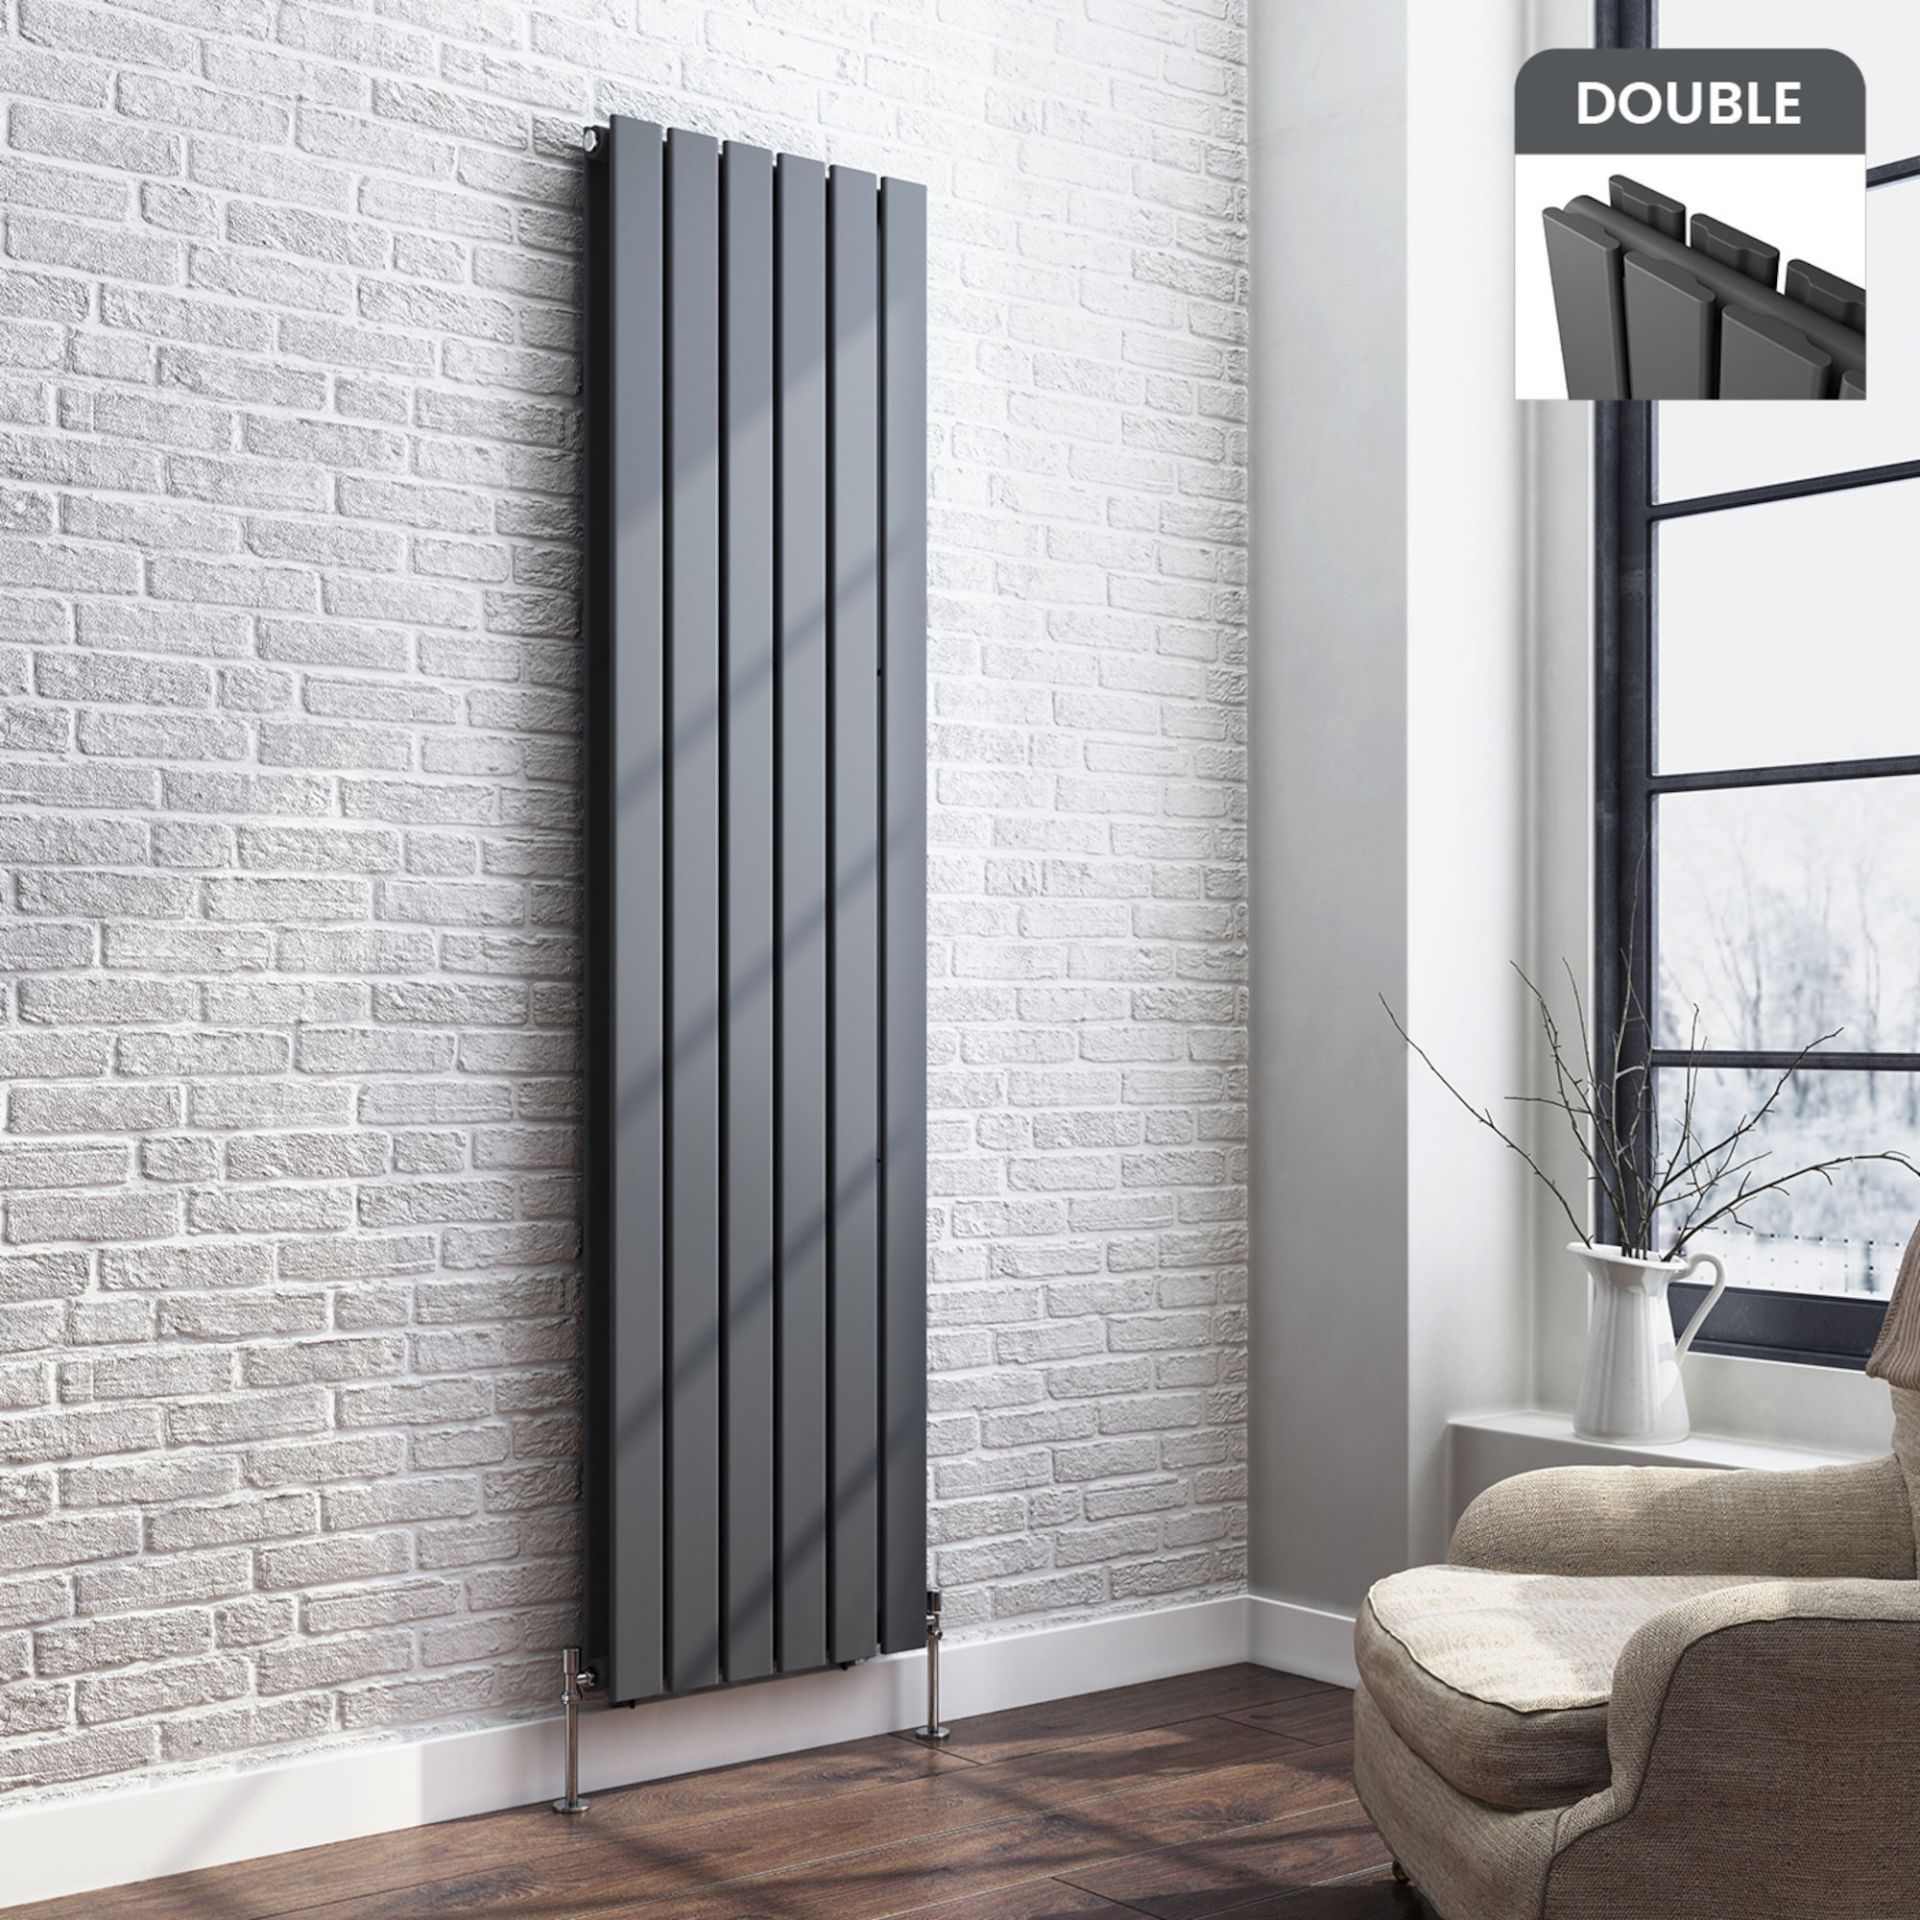 1800x480mm Anthracite Double Flat Panel Vertical Radiator. RRP £499.99. Made with low carbon steel